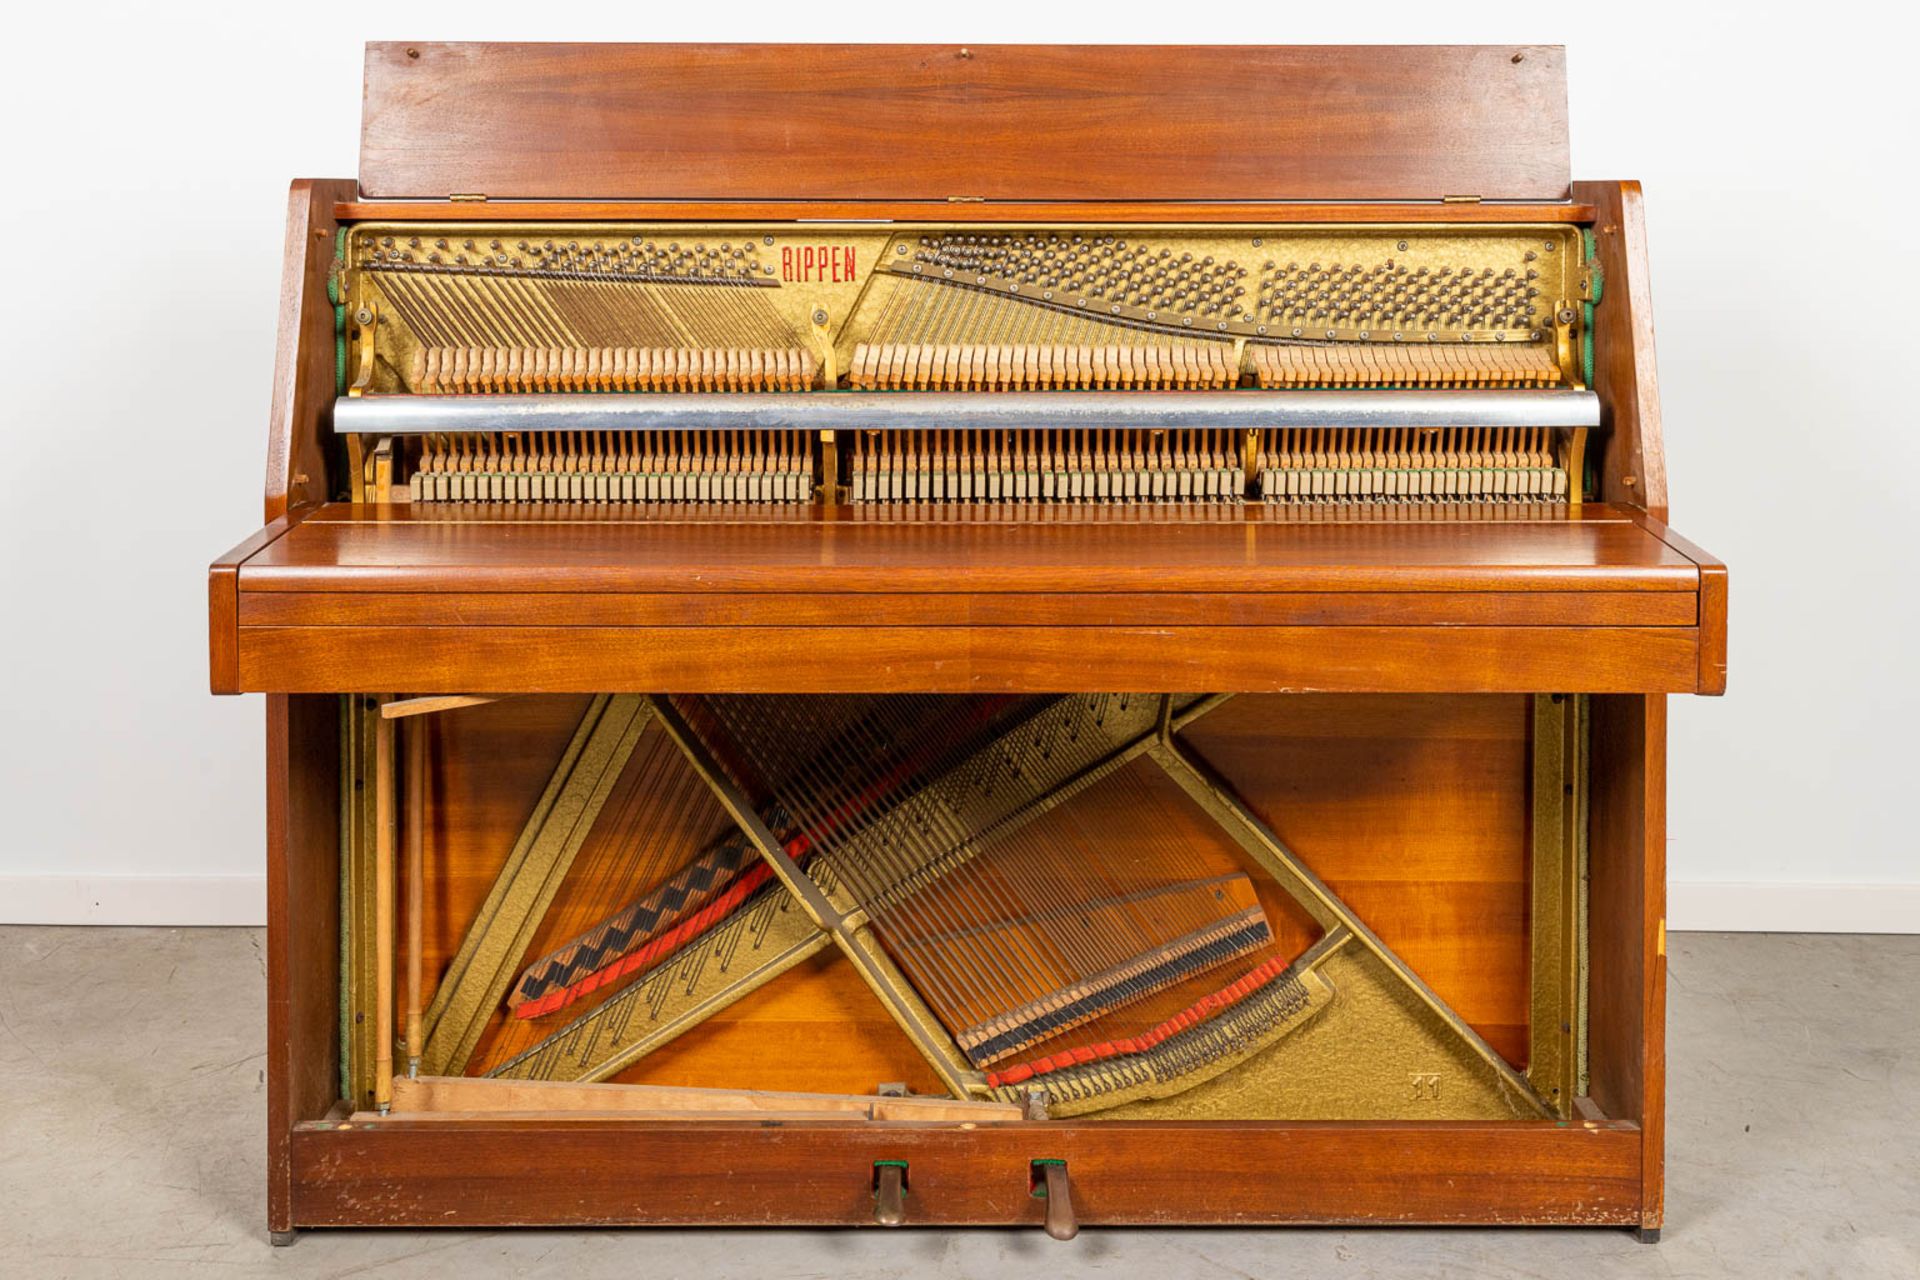 An upright piano with a steel frame and marked Rippen. - Image 7 of 7